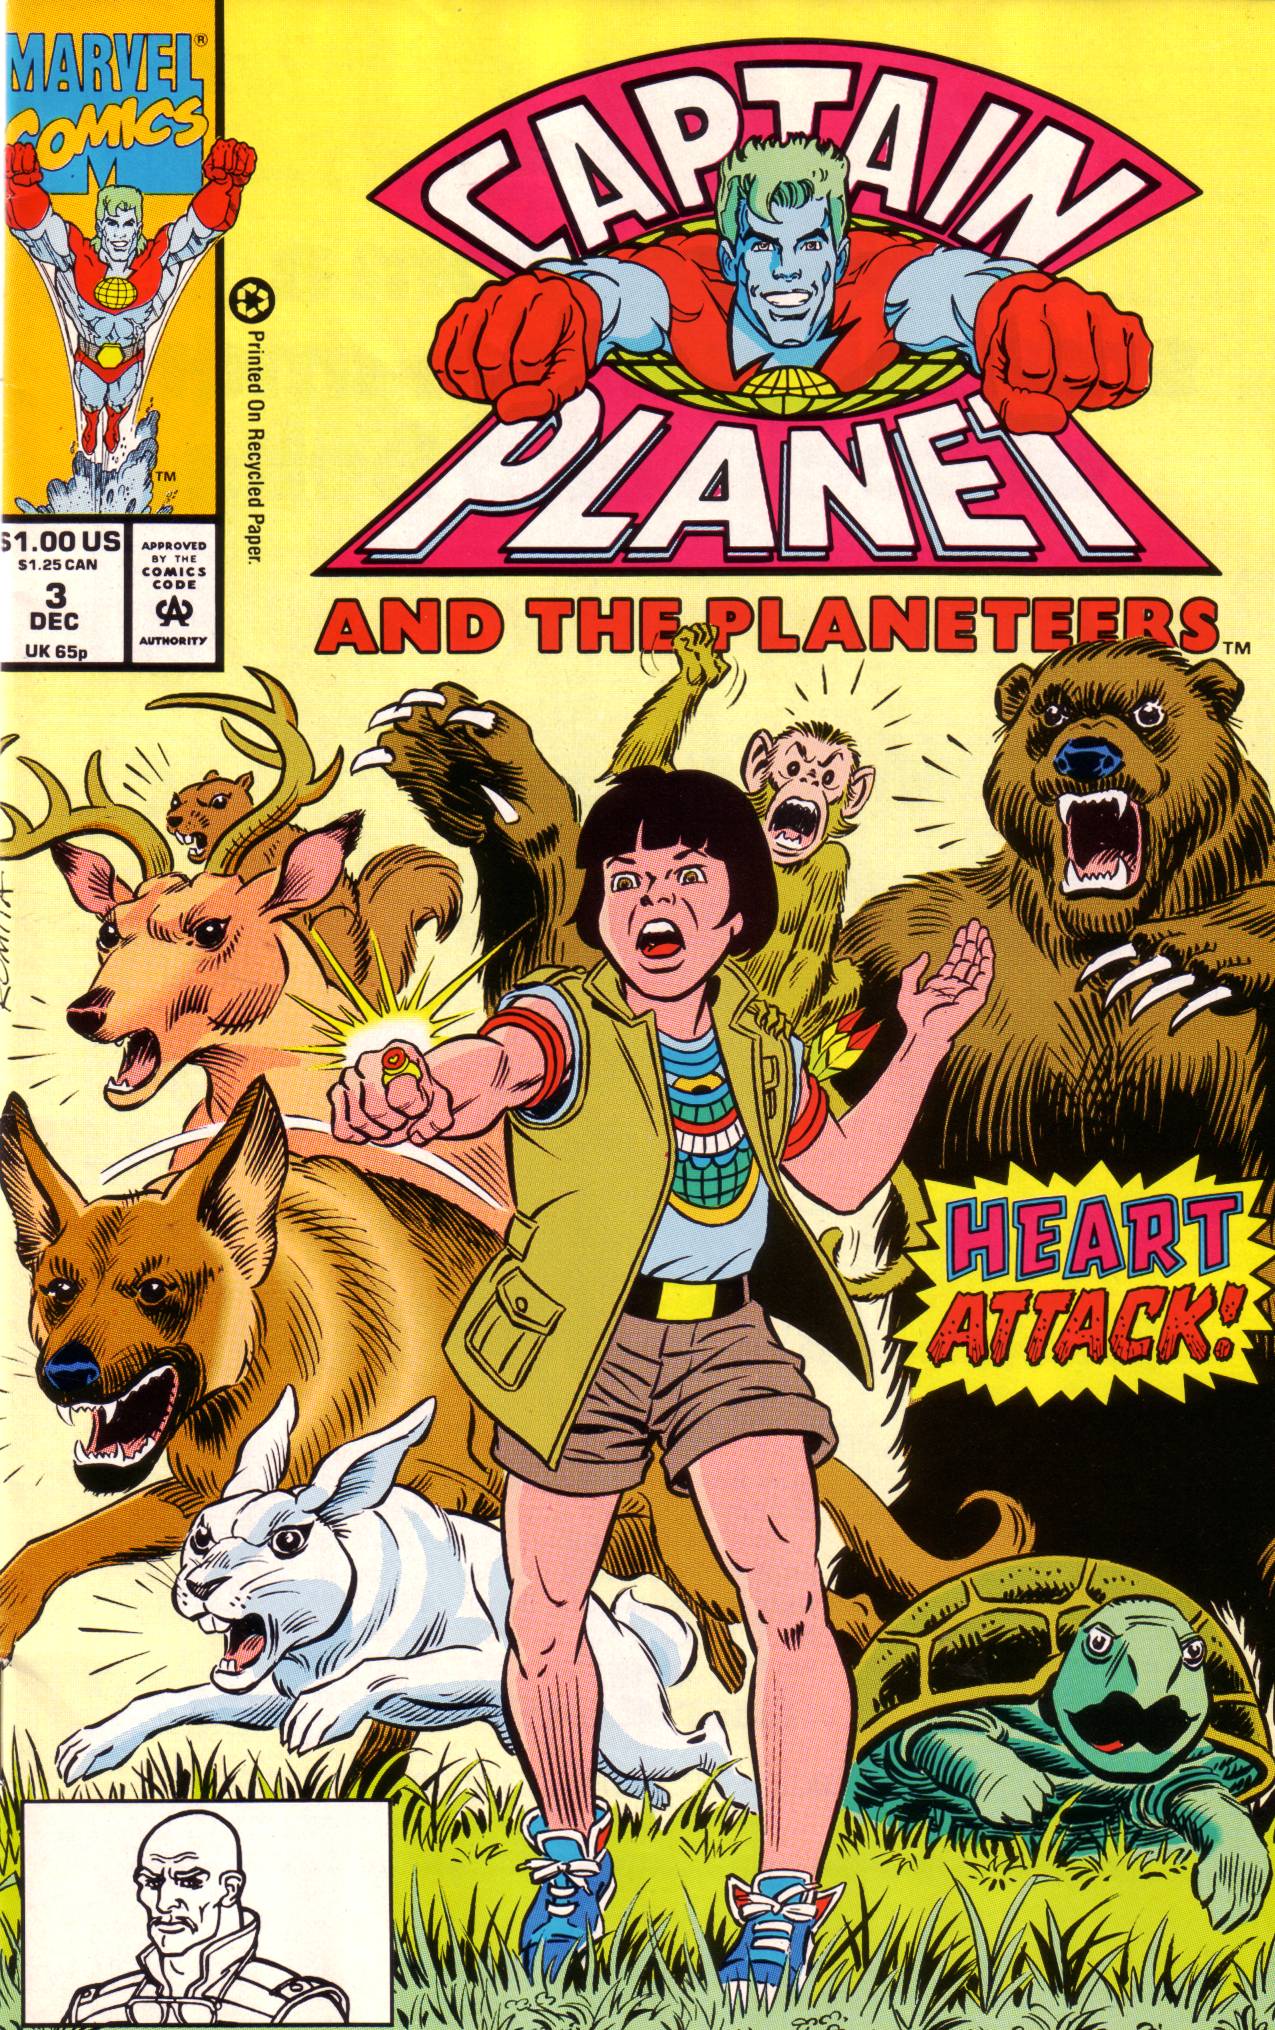 Read online Captain Planet and the Planeteers comic -  Issue #3 - 1